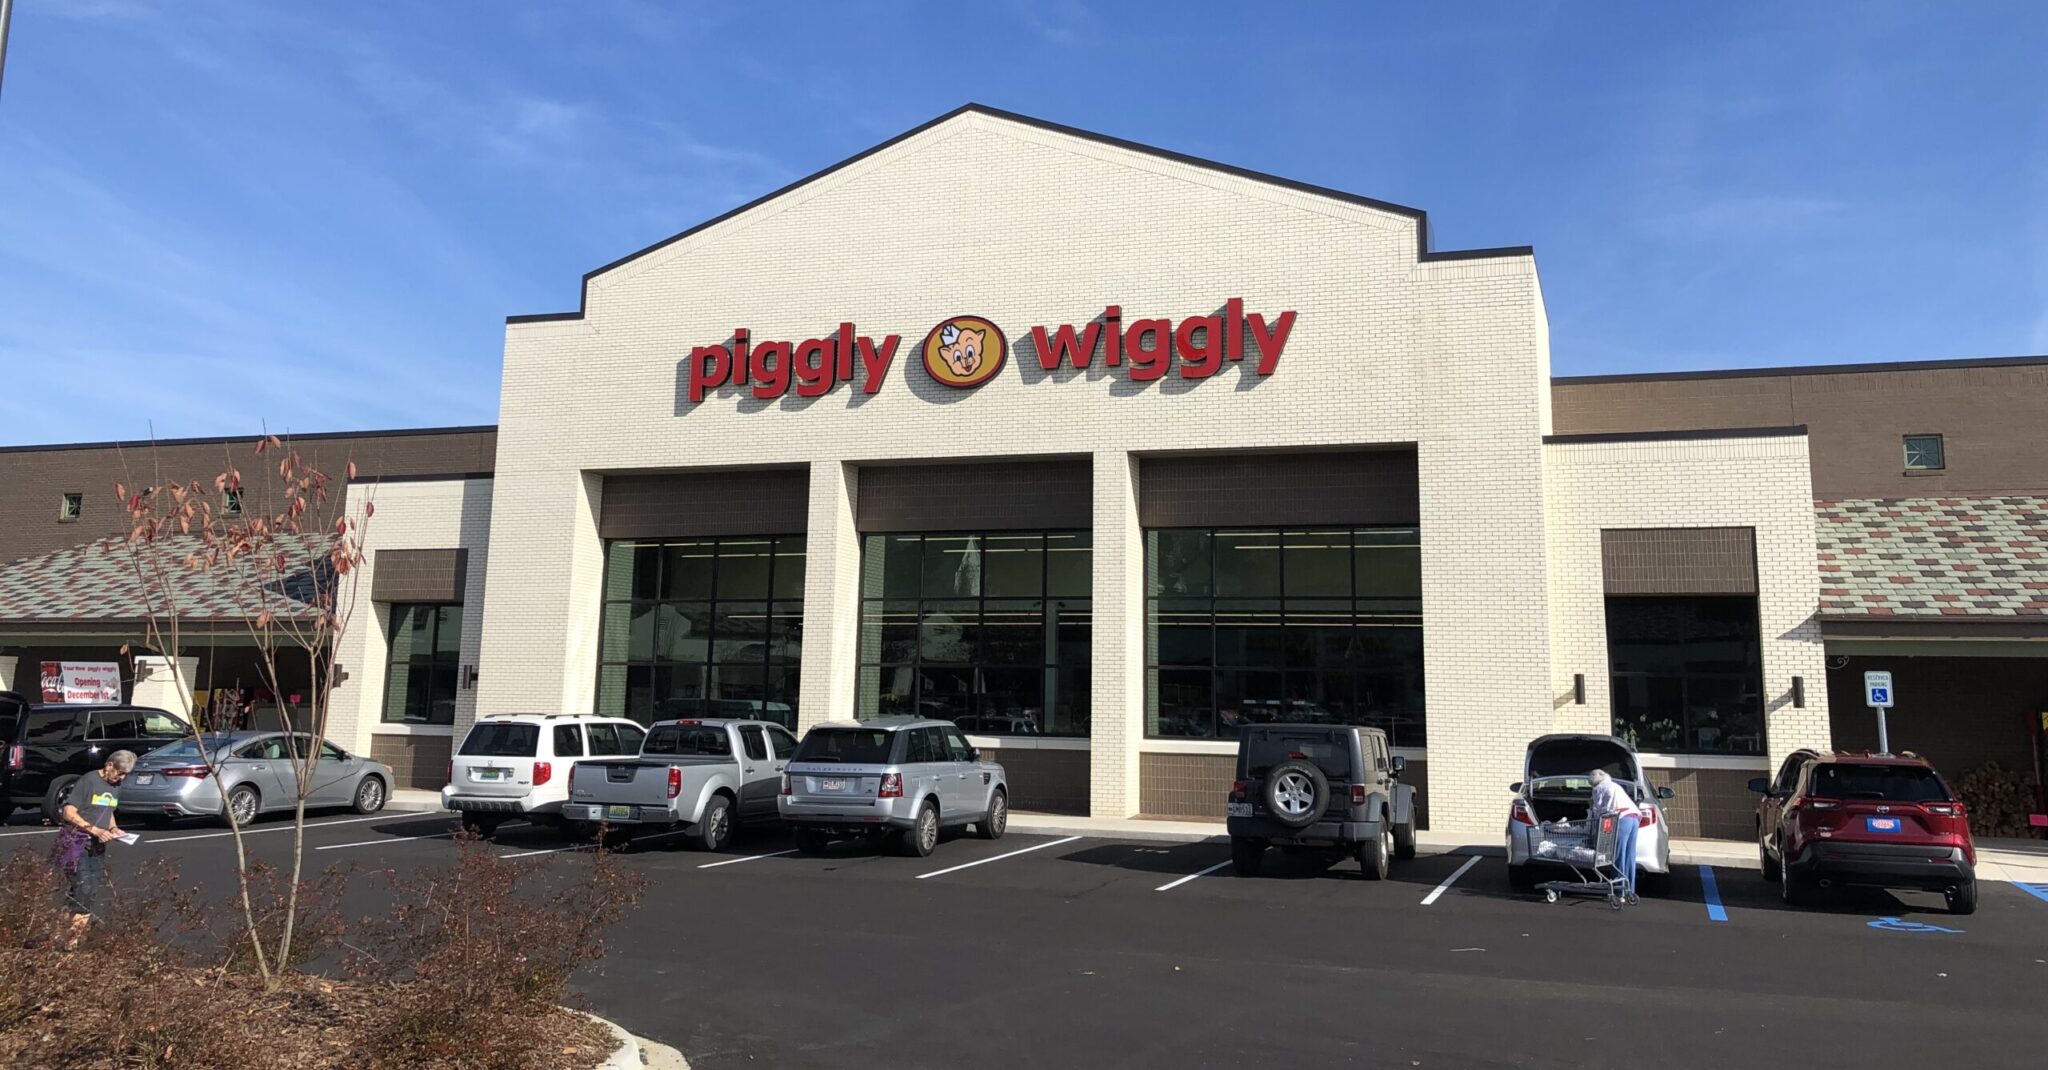 New Pig alert! Take a look inside the newly renovated Piggly Wiggly Bluff Park